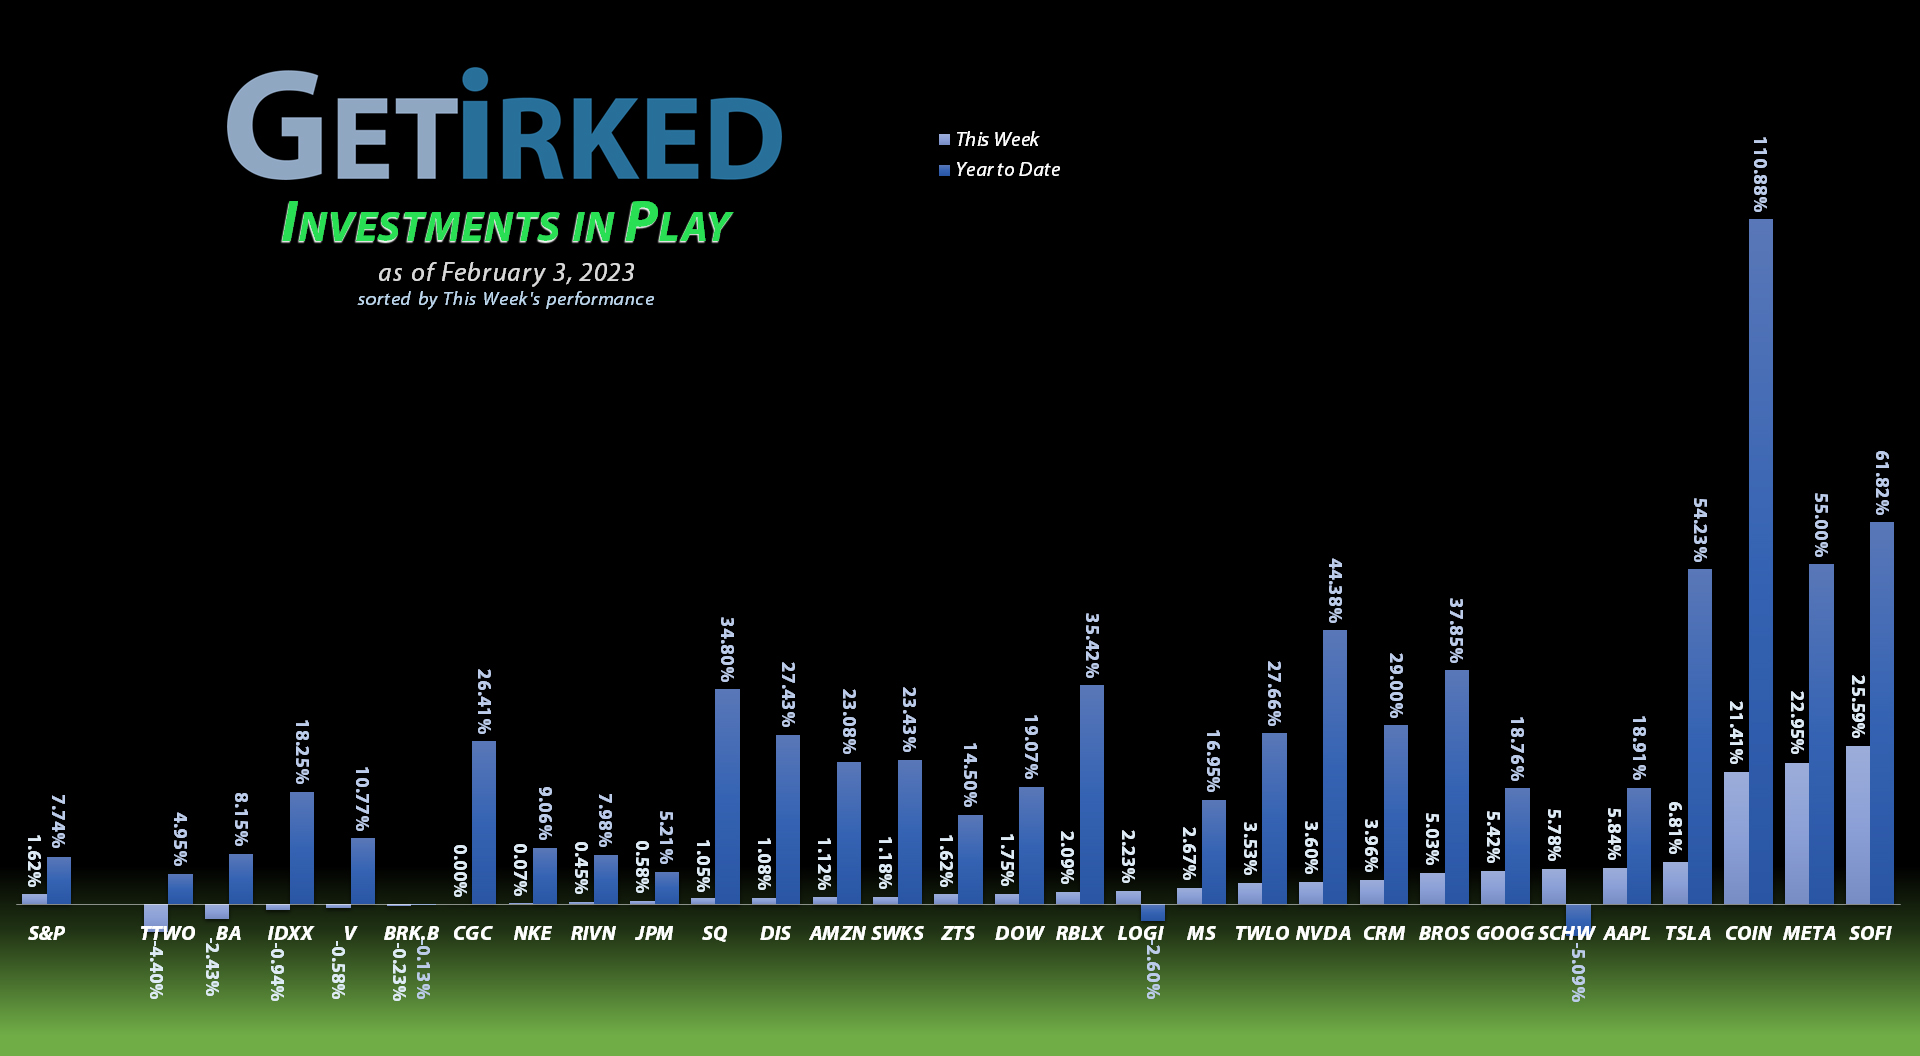 Get Irked - Investments in Play - February 3, 2023